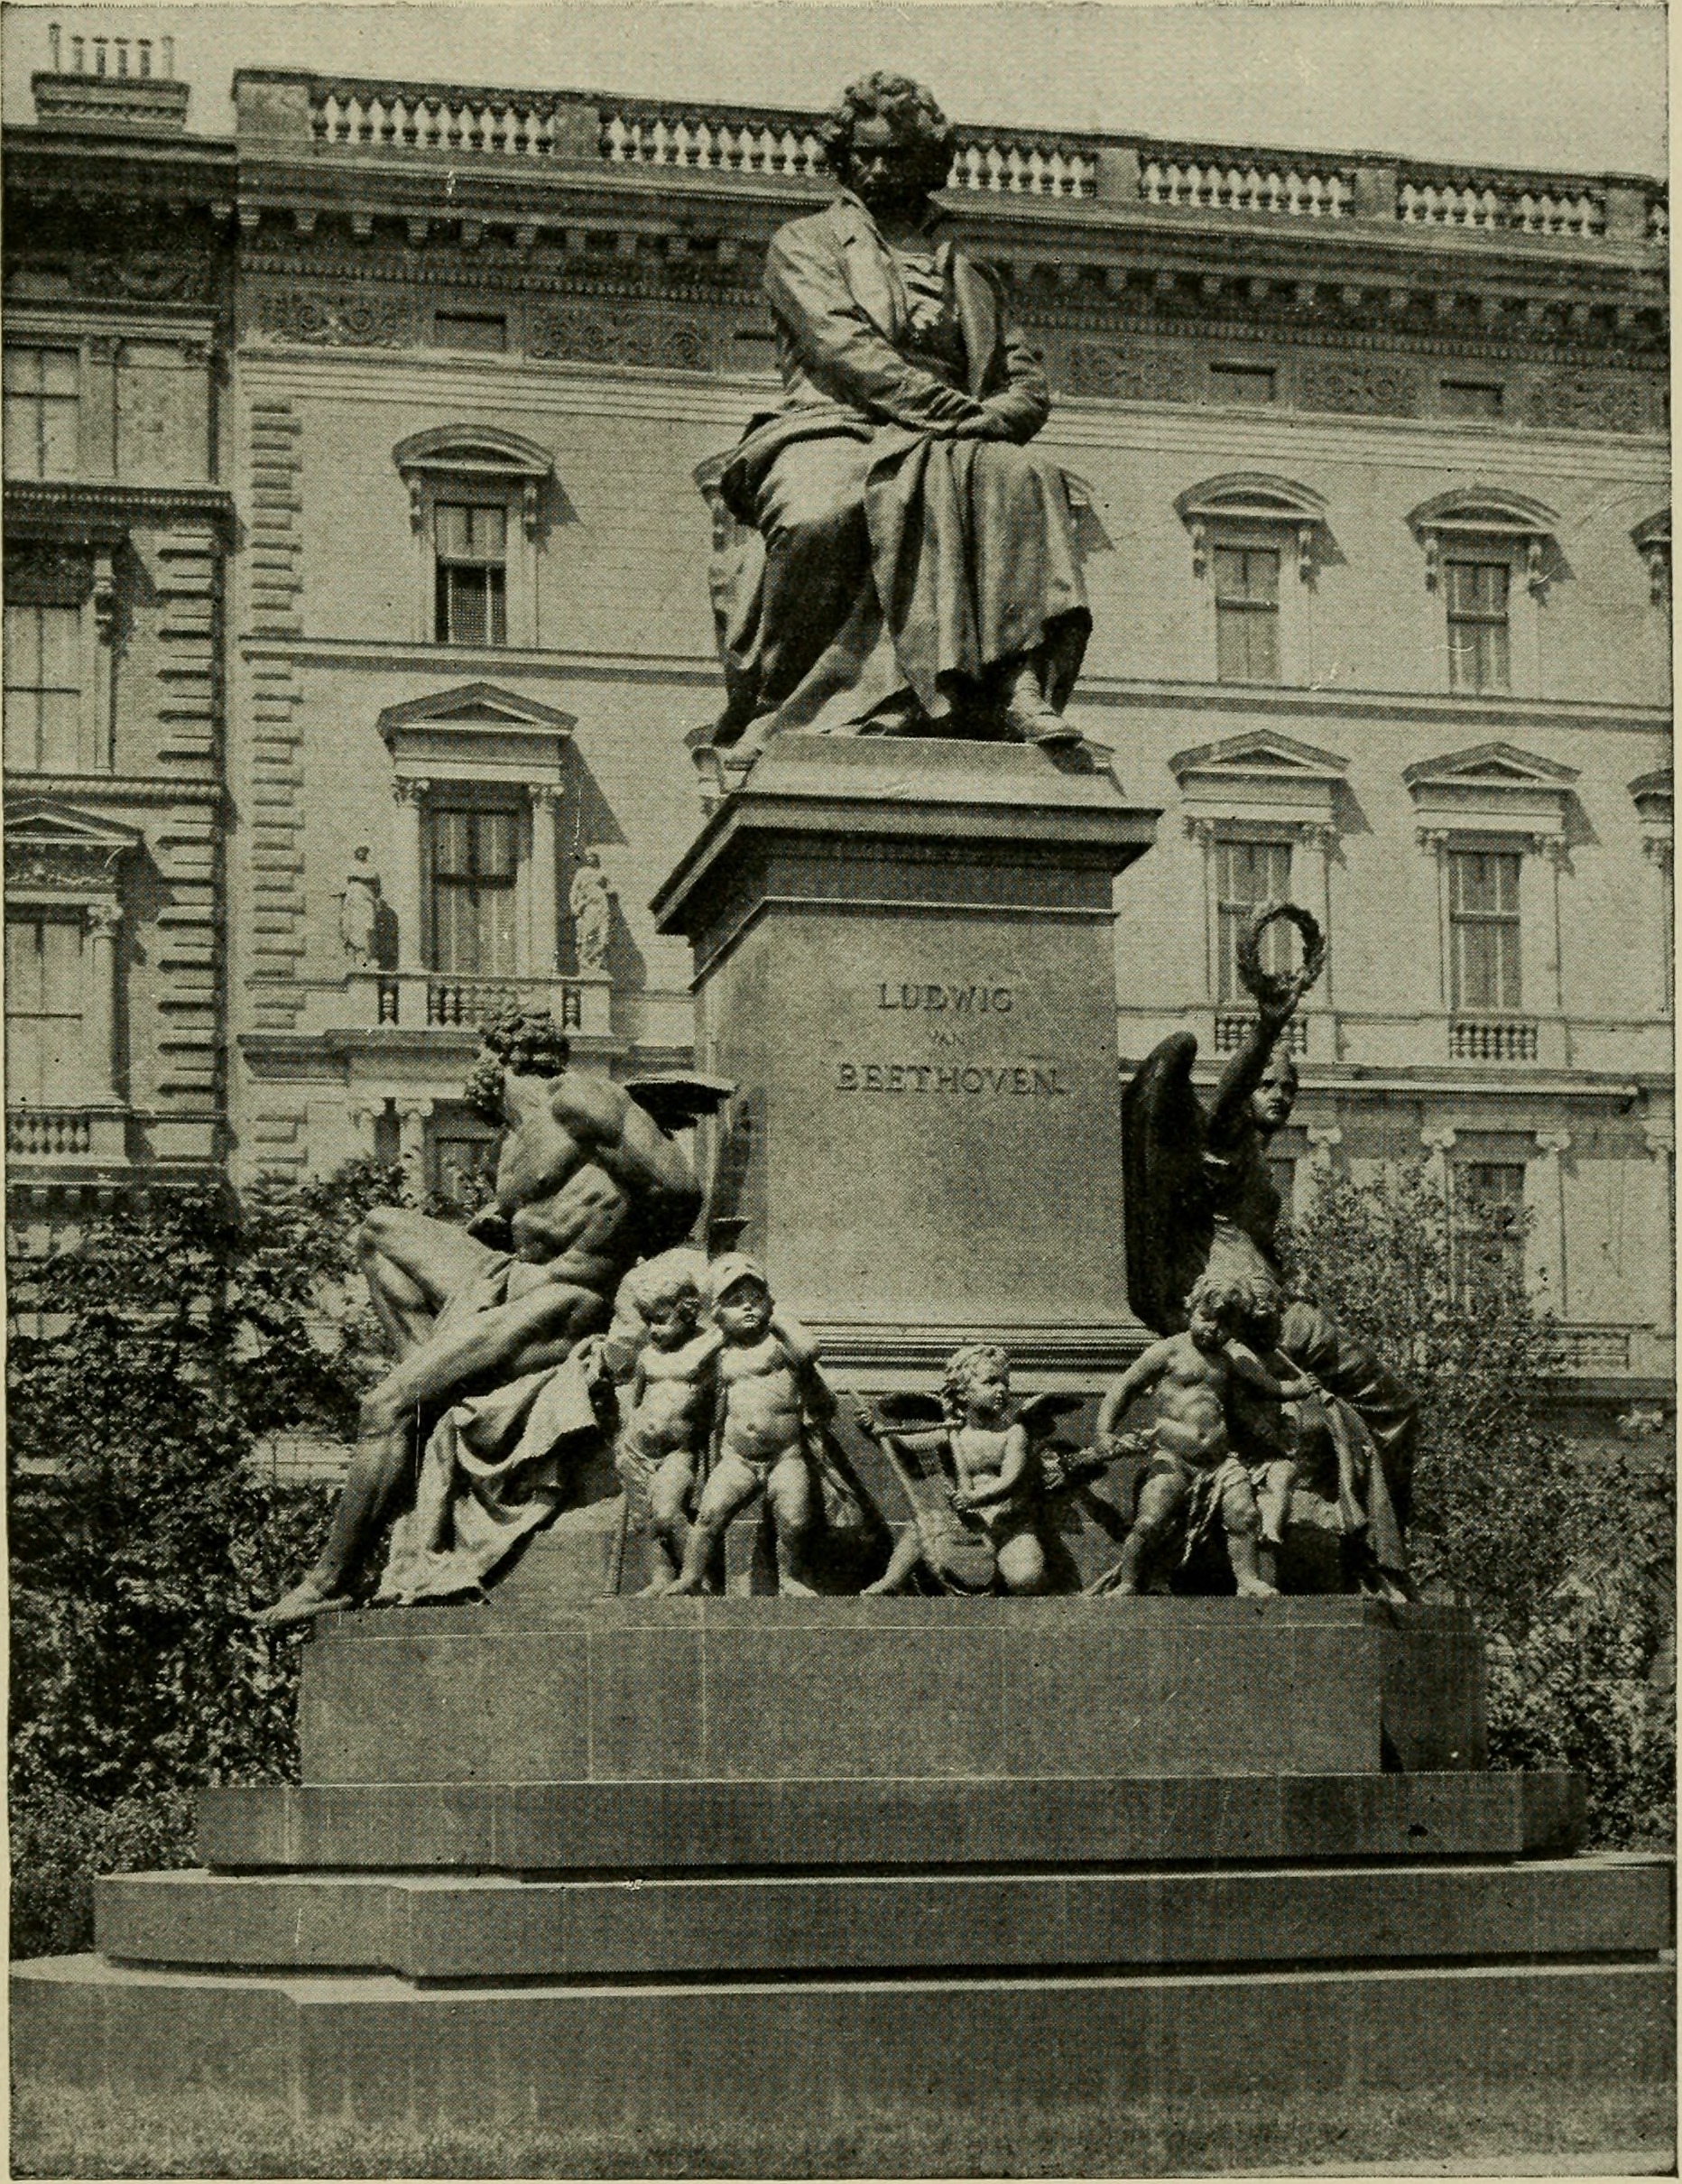 Beethoven Monument in Vienna in 1913